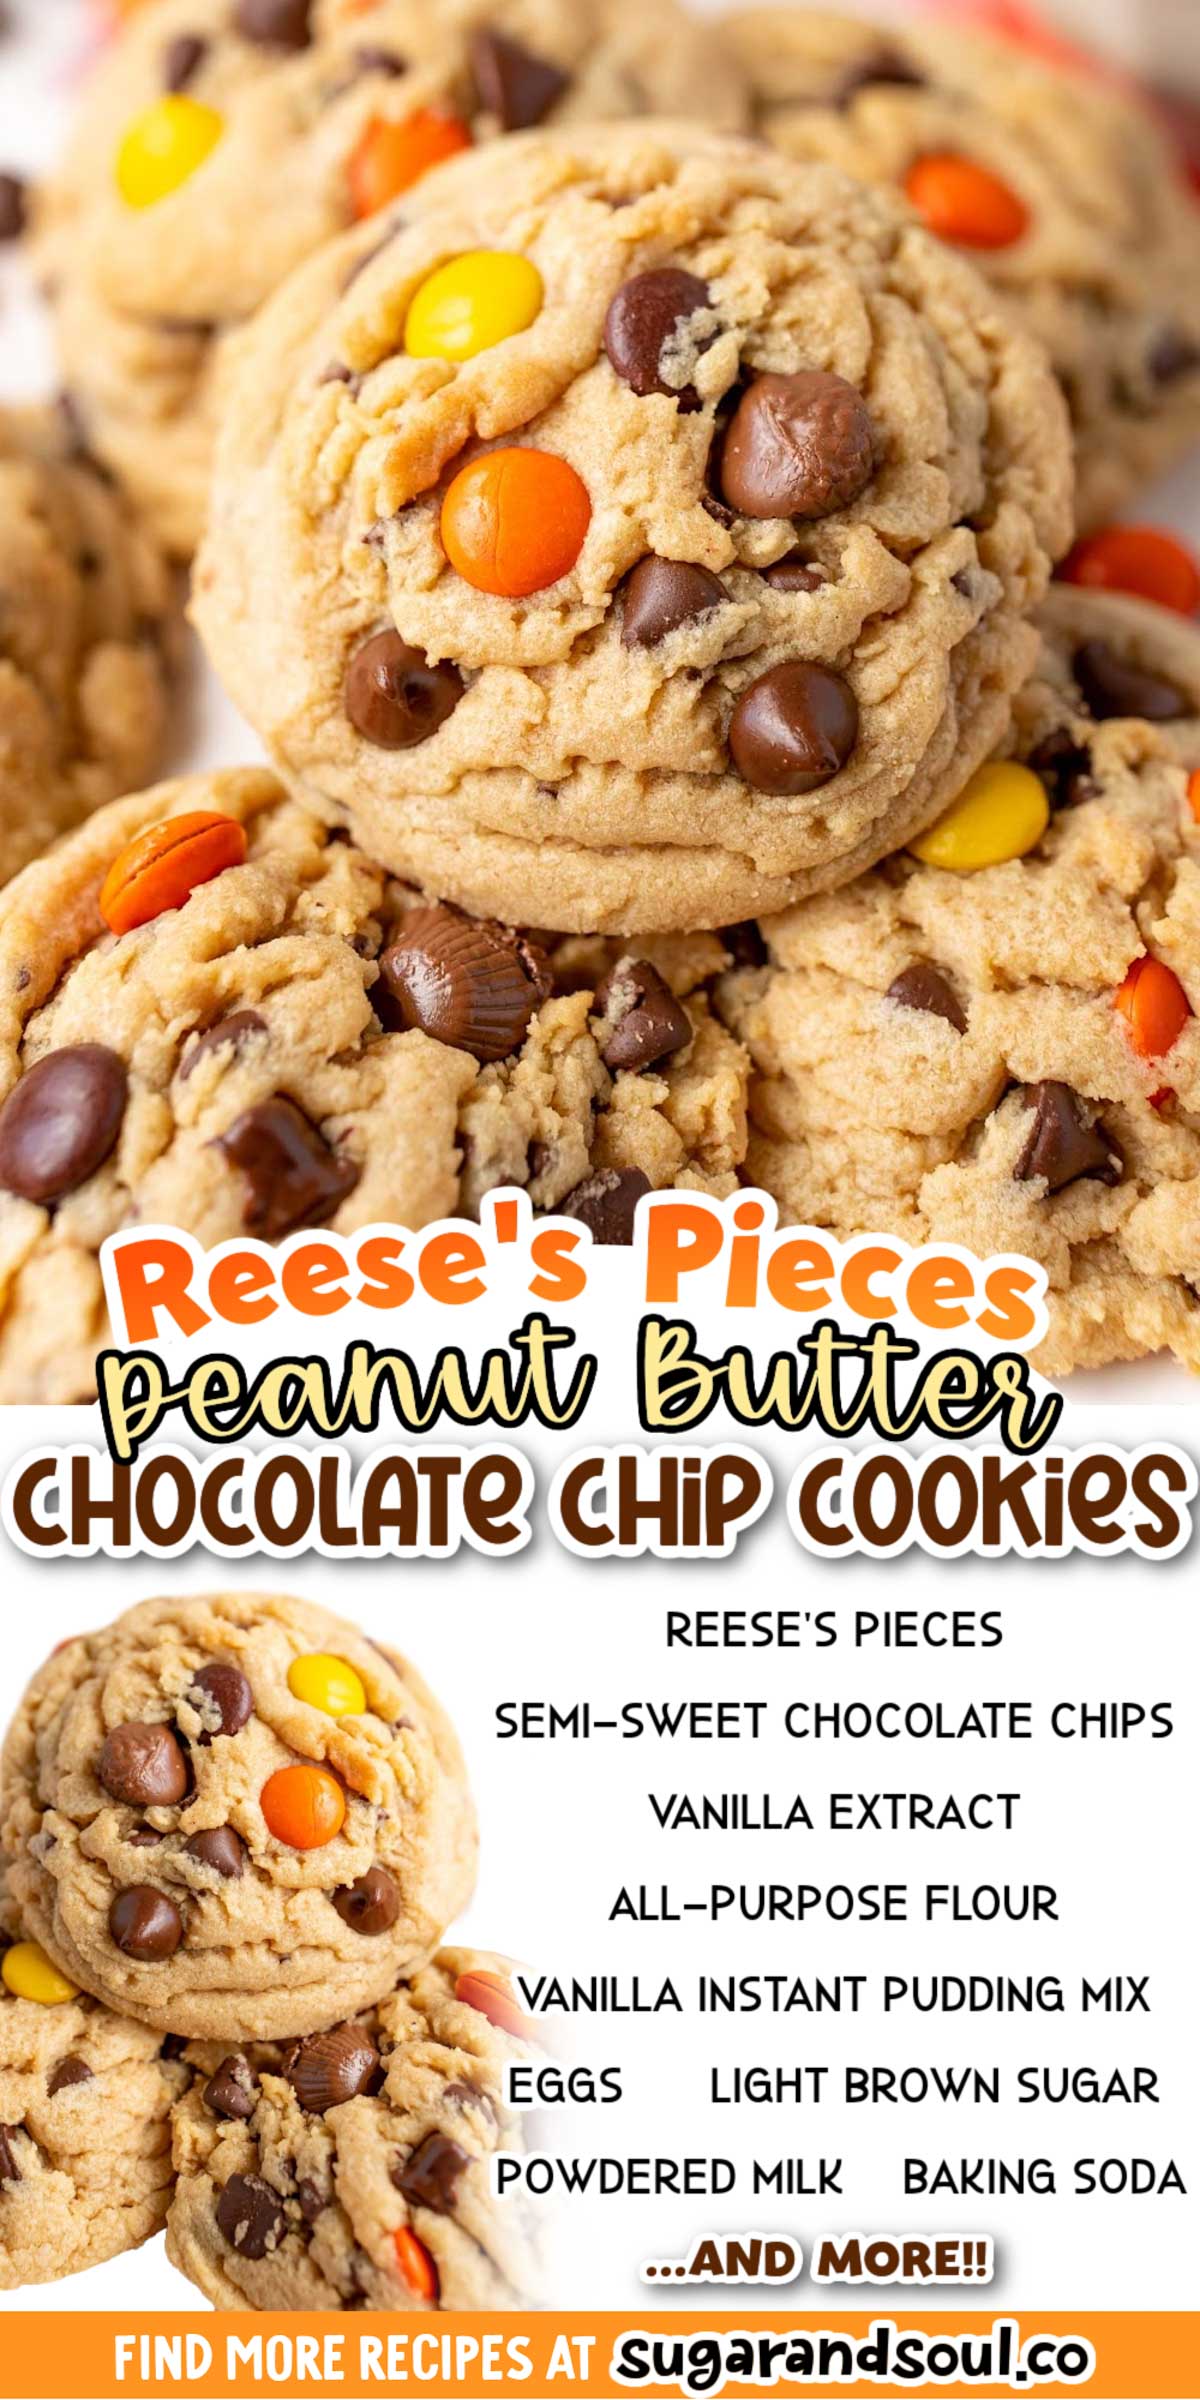 These Reese's Pieces Peanut Butter Cookies pair creamy peanut butter with vanilla instant pudding mix and pantry staple ingredients! Each batch takes just 10 minutes to bake up to golden brown perfection! via @sugarandsoulco